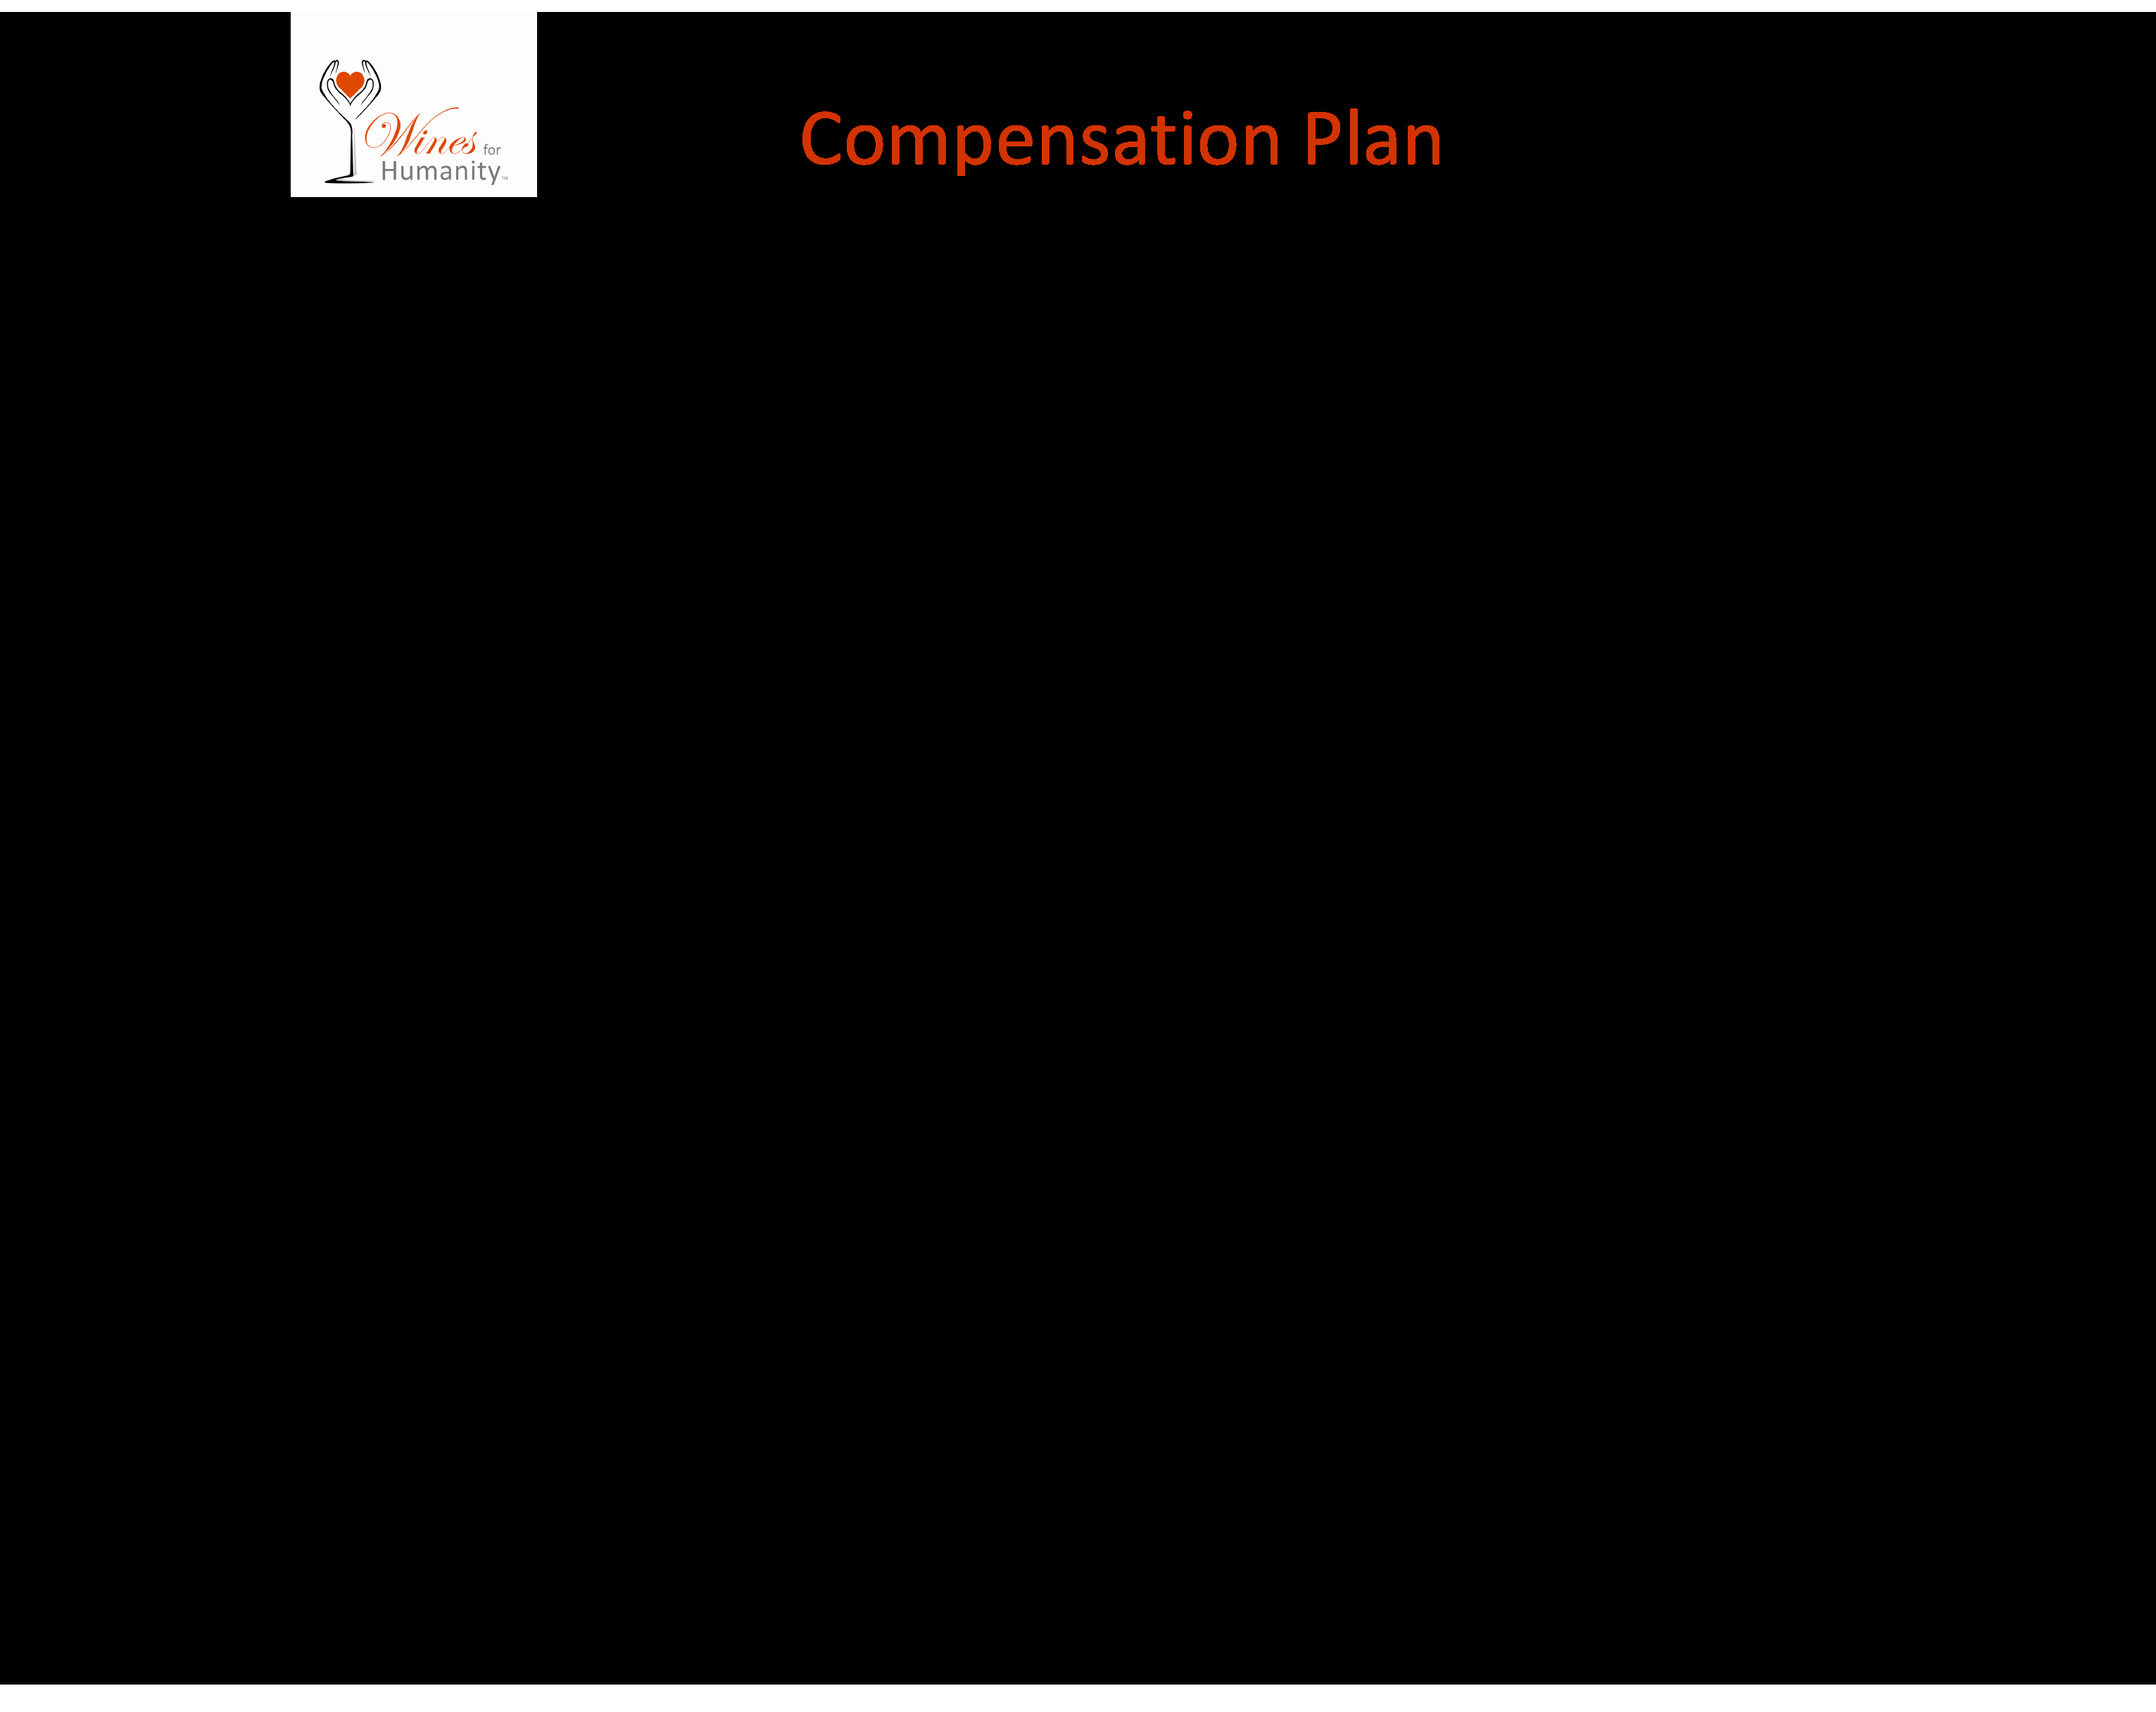 Sales Compensation Plan Template Luxury Wines for Humanity